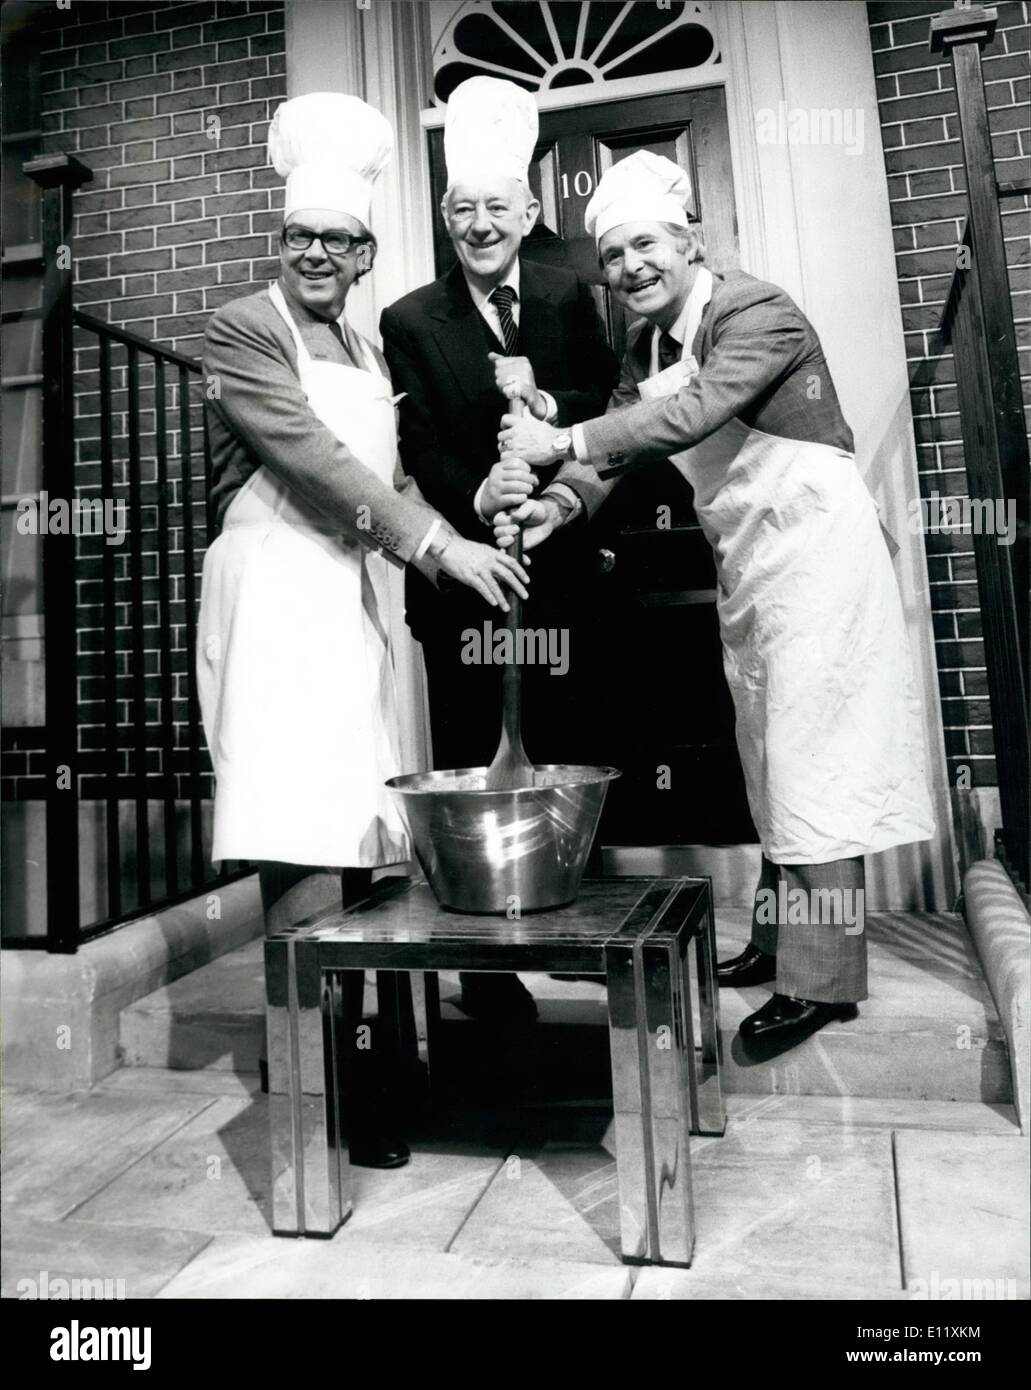 Nov. 11, 1980 - ERIC AND ERNIE'S CHRISTMAS SHOW Sir Alec Guinness is Eric and Ernie's principal guest on this year's Christmas Show now being shot at Thames Television's Teddington Studios. PHOTO SHOWS Eric Morecombe and Ernie Wise seen outside a mock-up of No 10 and with the help of Sir Alec Guinness they are seen stirring a christmas pudding. Stock Photo